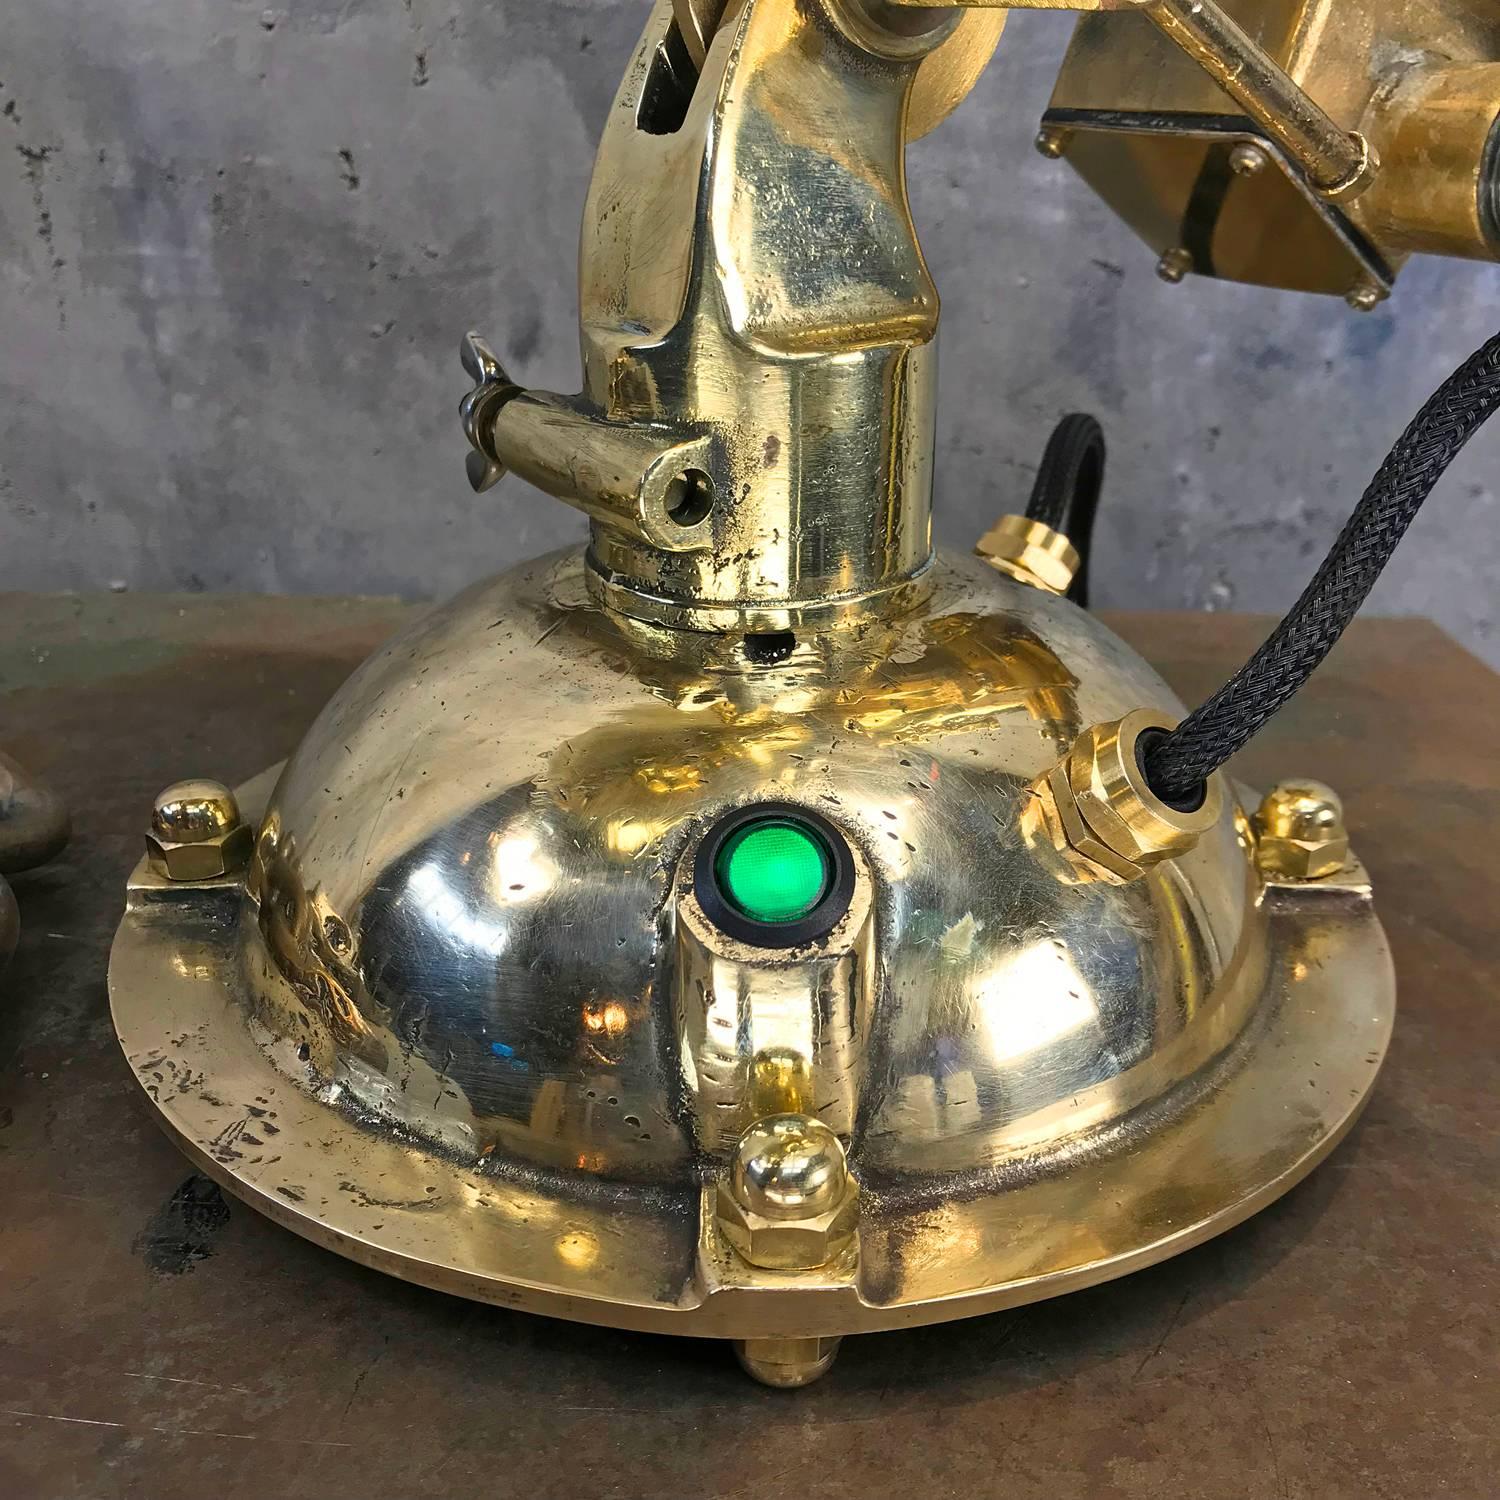 Late 20th Century Midcentury Japanese Brass Industrial Searchlight / Table Lamp E27 Edison Bulb